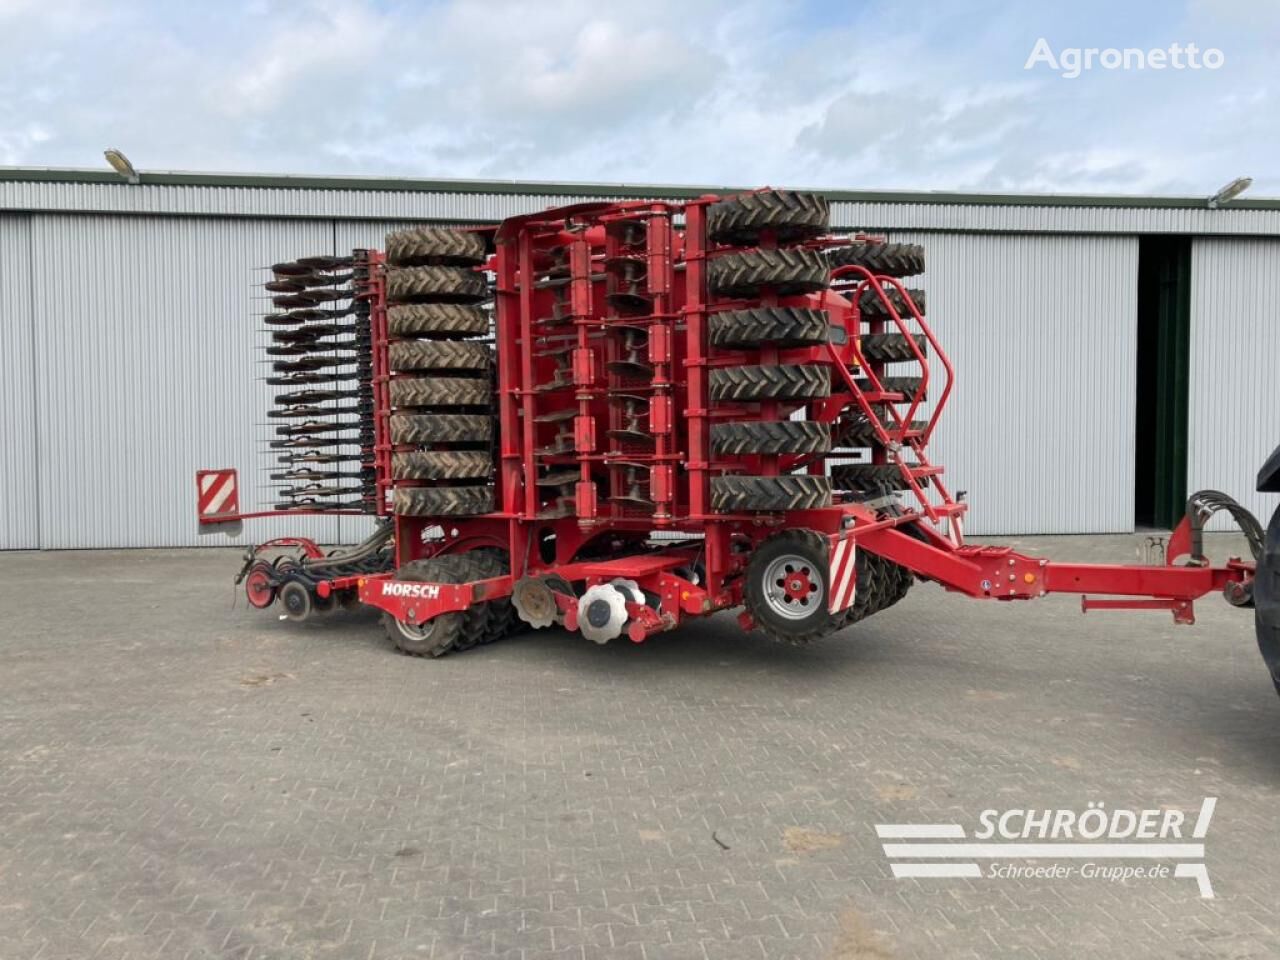 Horsch PRONTO 7 DC manual seed drill